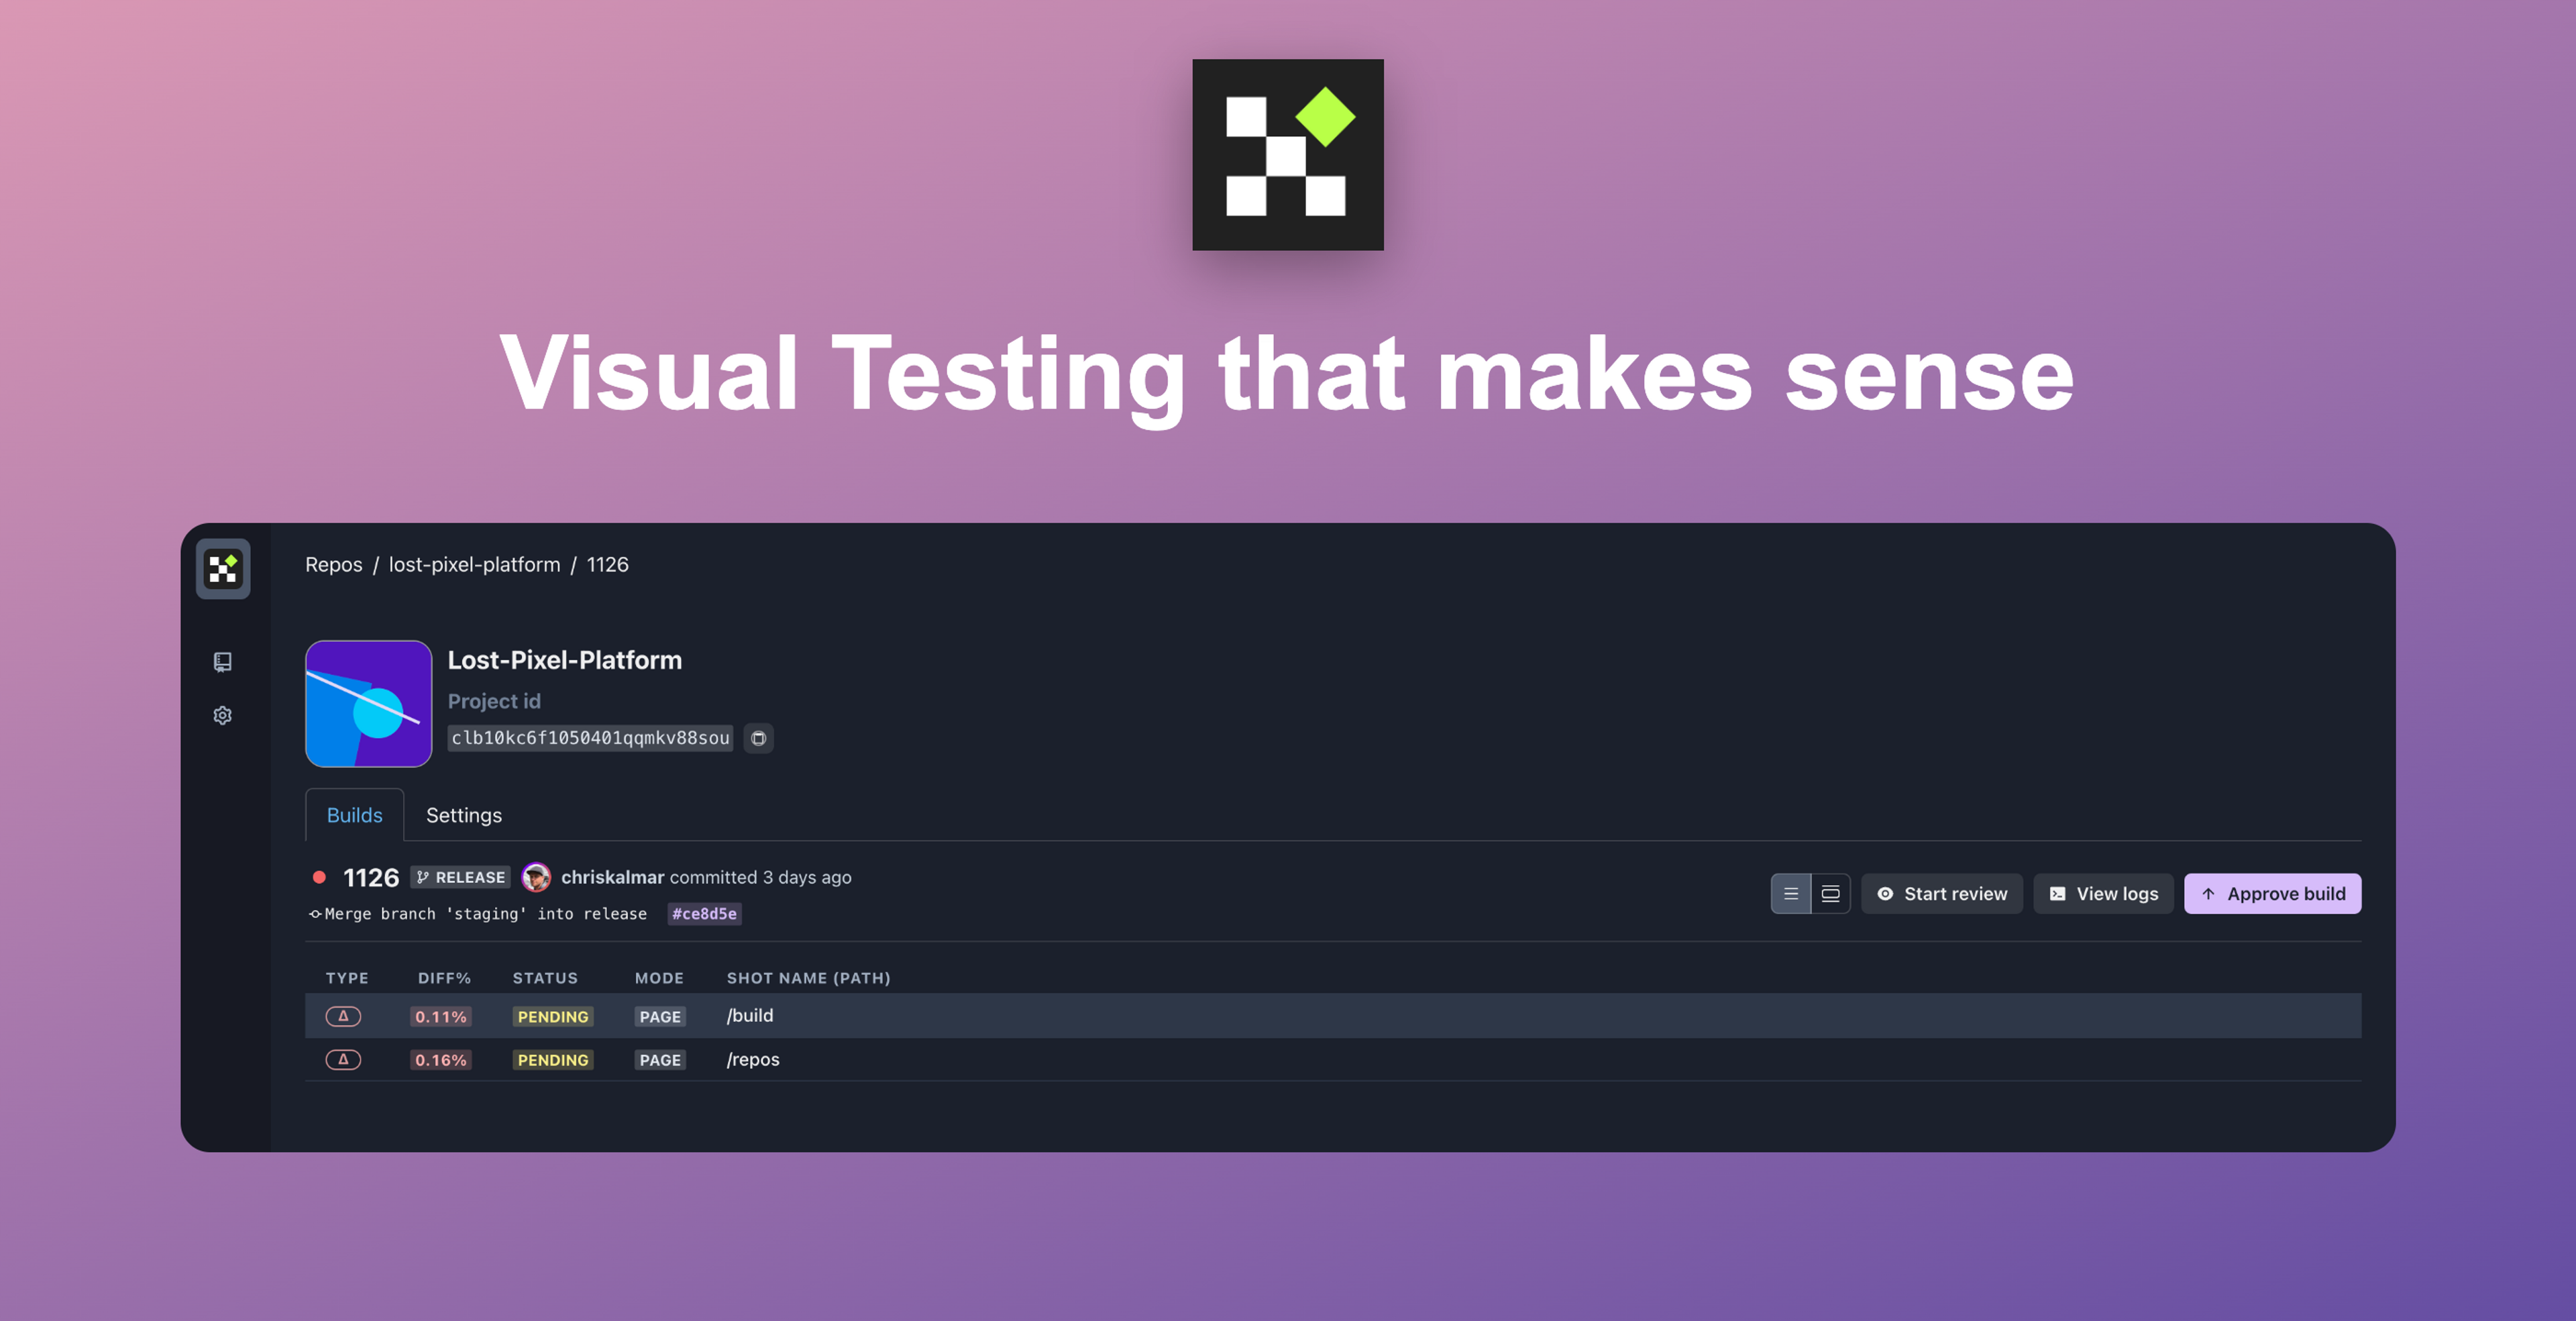 Lost Pixel platform UI together with a title "Visual testing that makes sense"